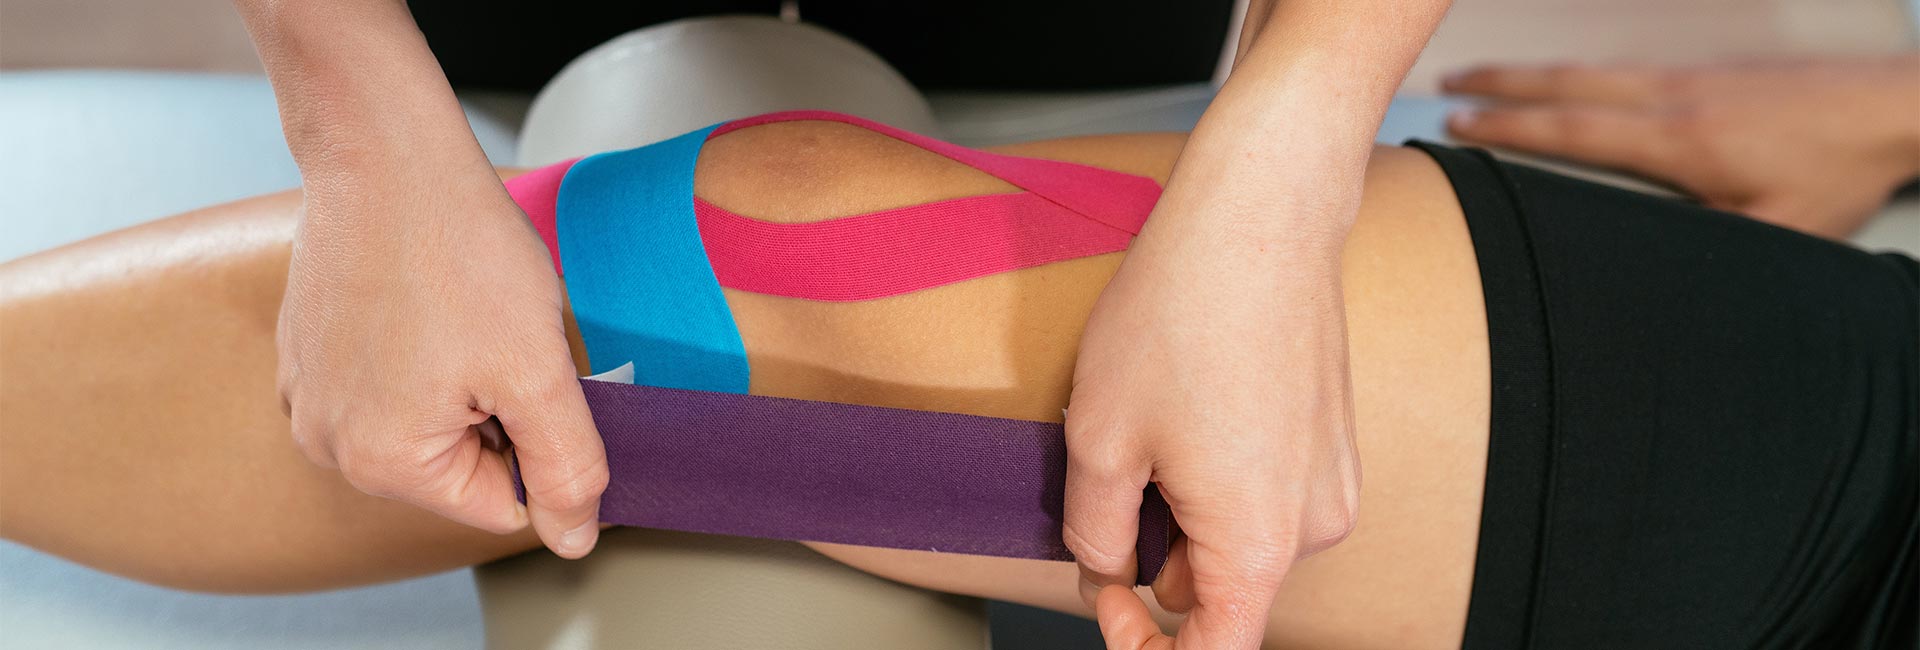 A physical therapist applies KT tape to a patient's knee